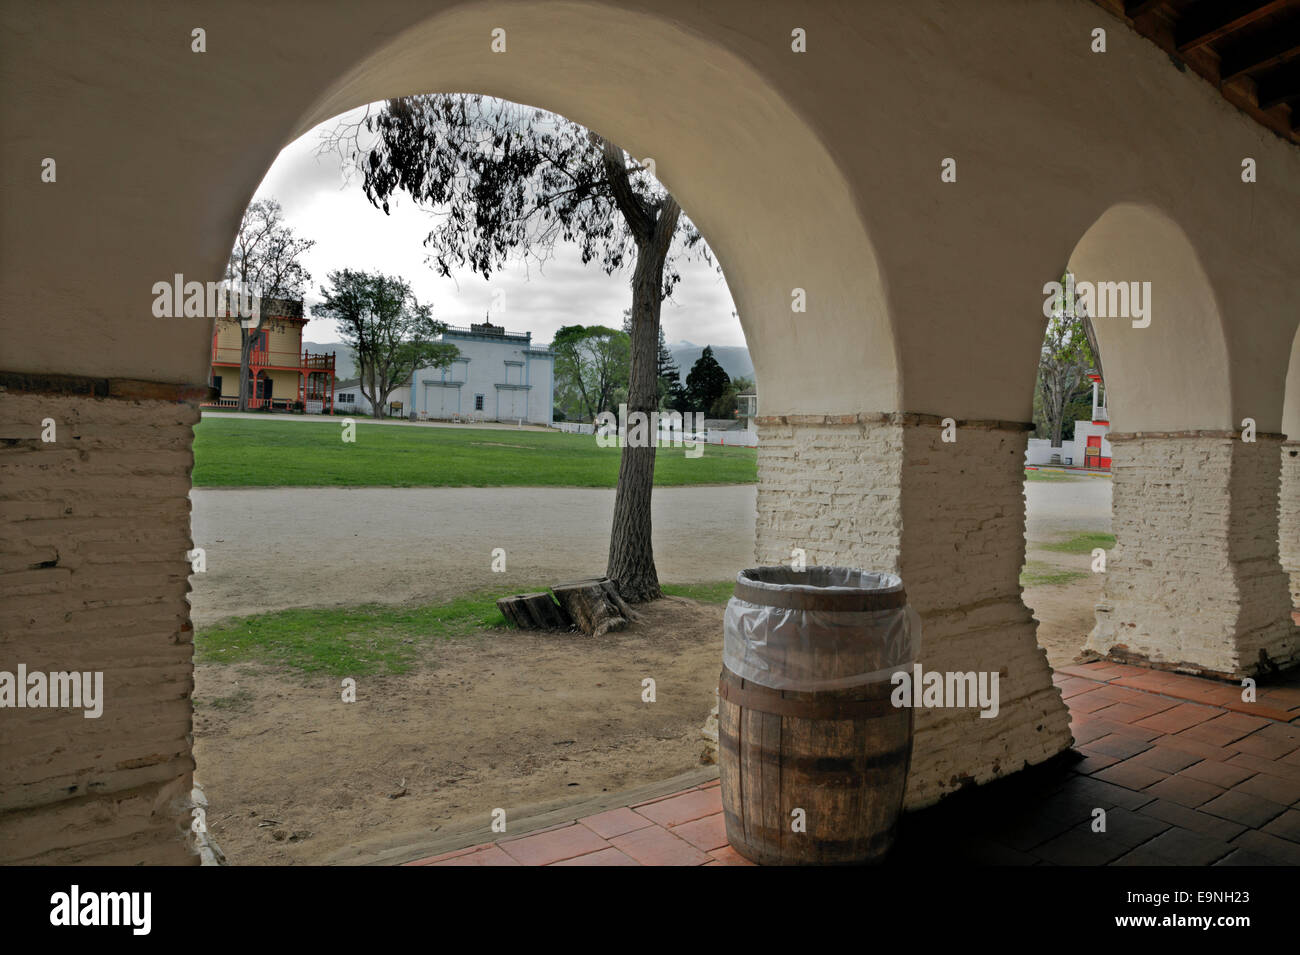 CALIFORNIA - Plaza area from the covered walkway at Mission San Juan Bautista at the San Juan Bautista State Historic Park. Stock Photo